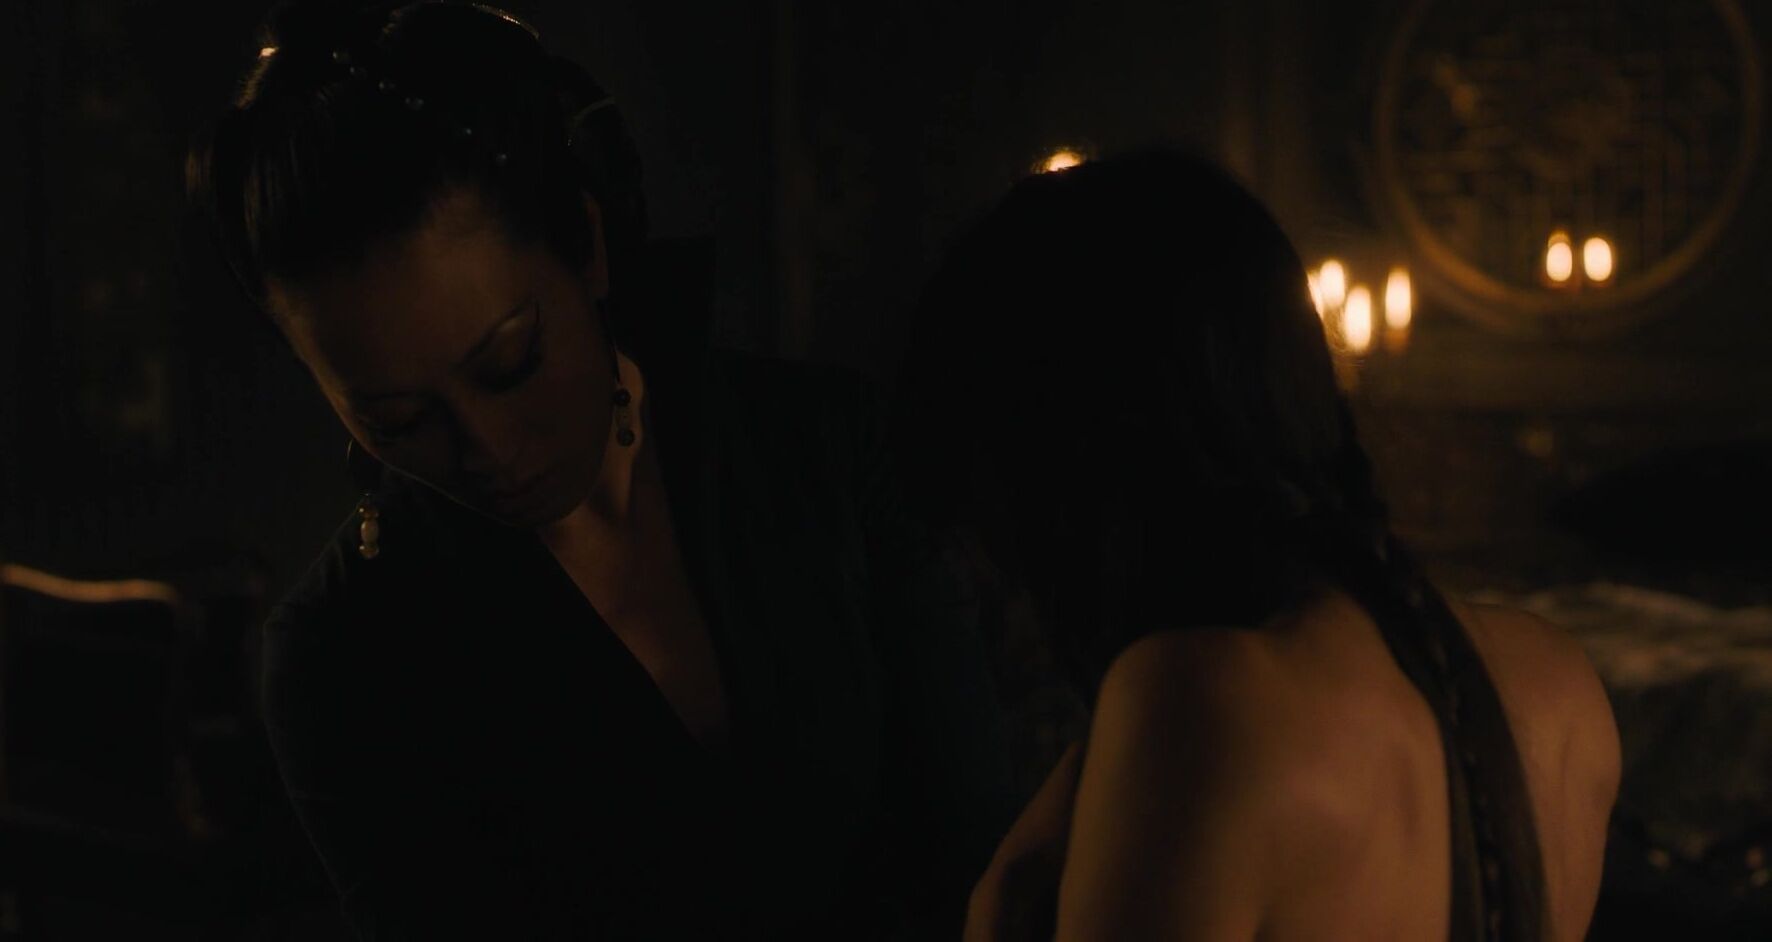 Ass Licking Hanni Choi is sexy to look at in Warrior s01e07 (2019) Gordita